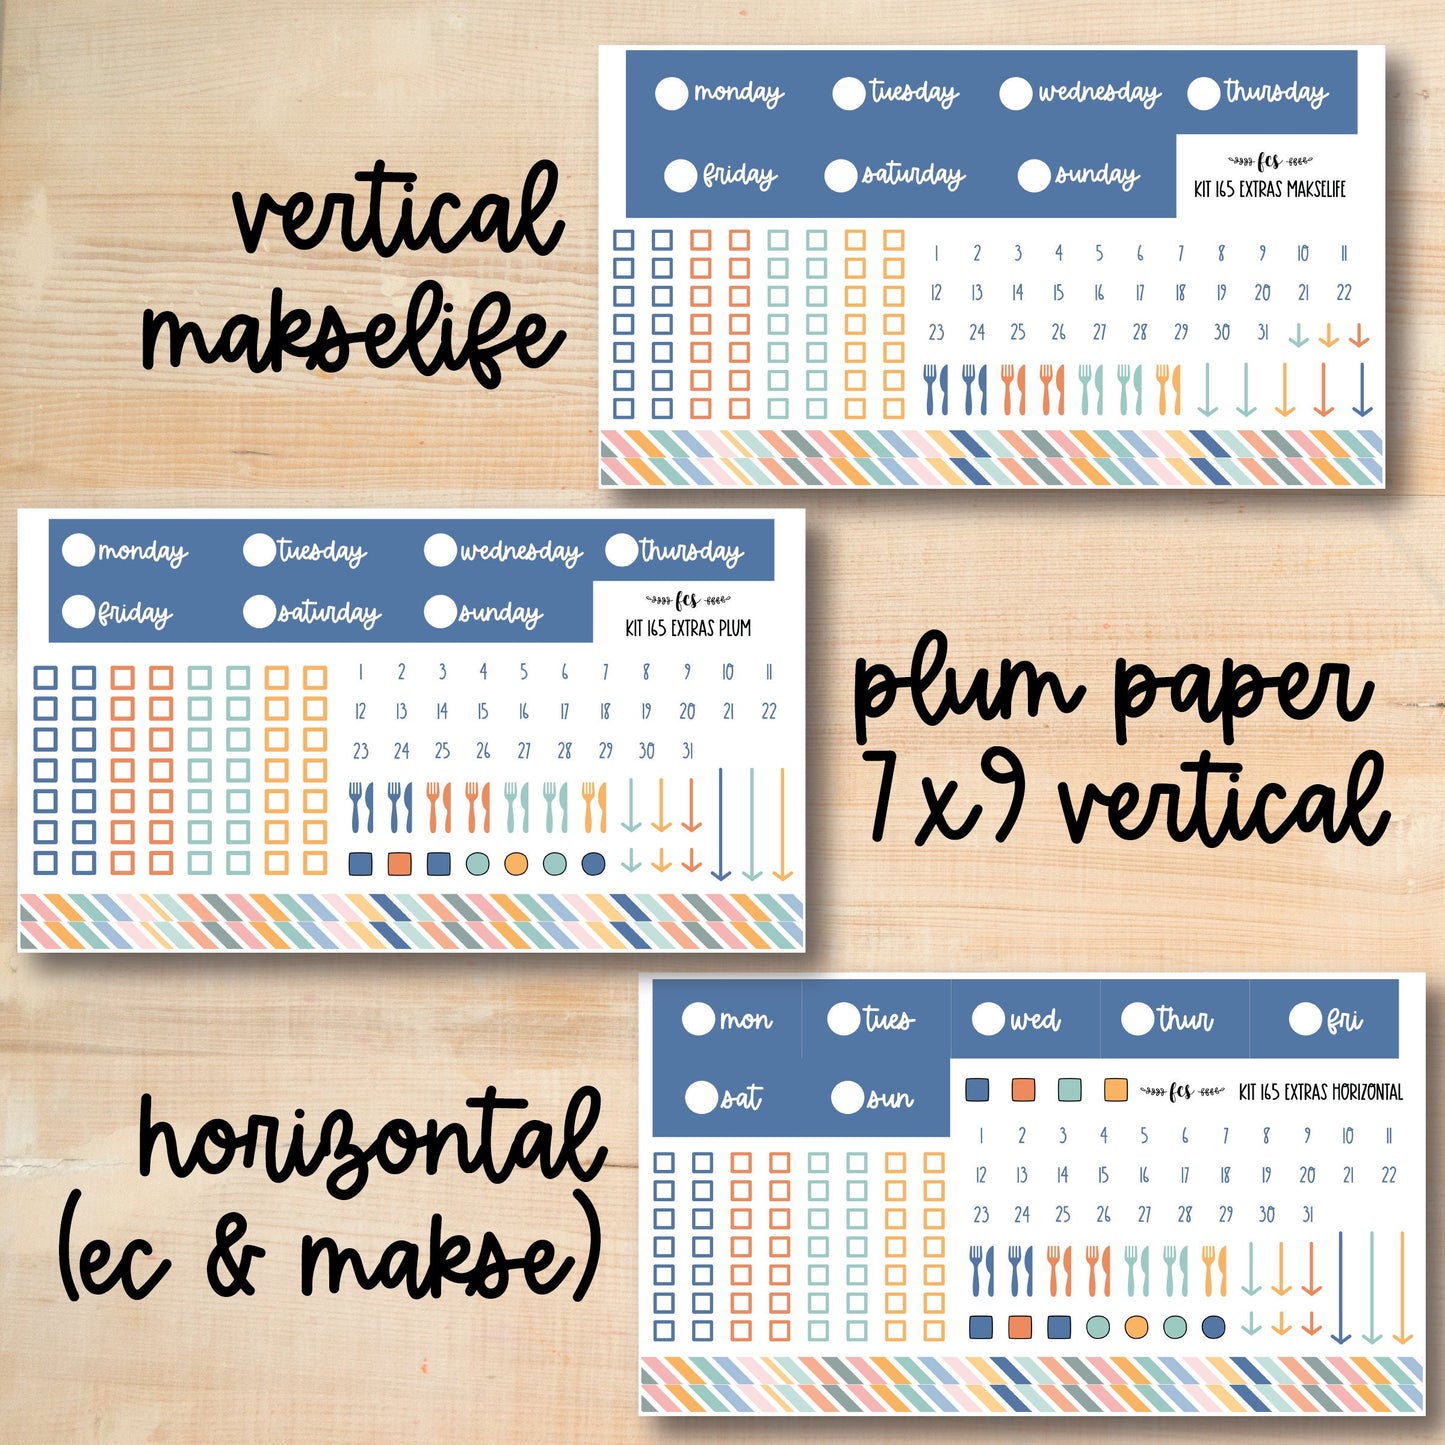 KIT-165 || BEAUTIFUL DAY weekly planner kit for Erin Condren, Plum Paper, MakseLife and more!